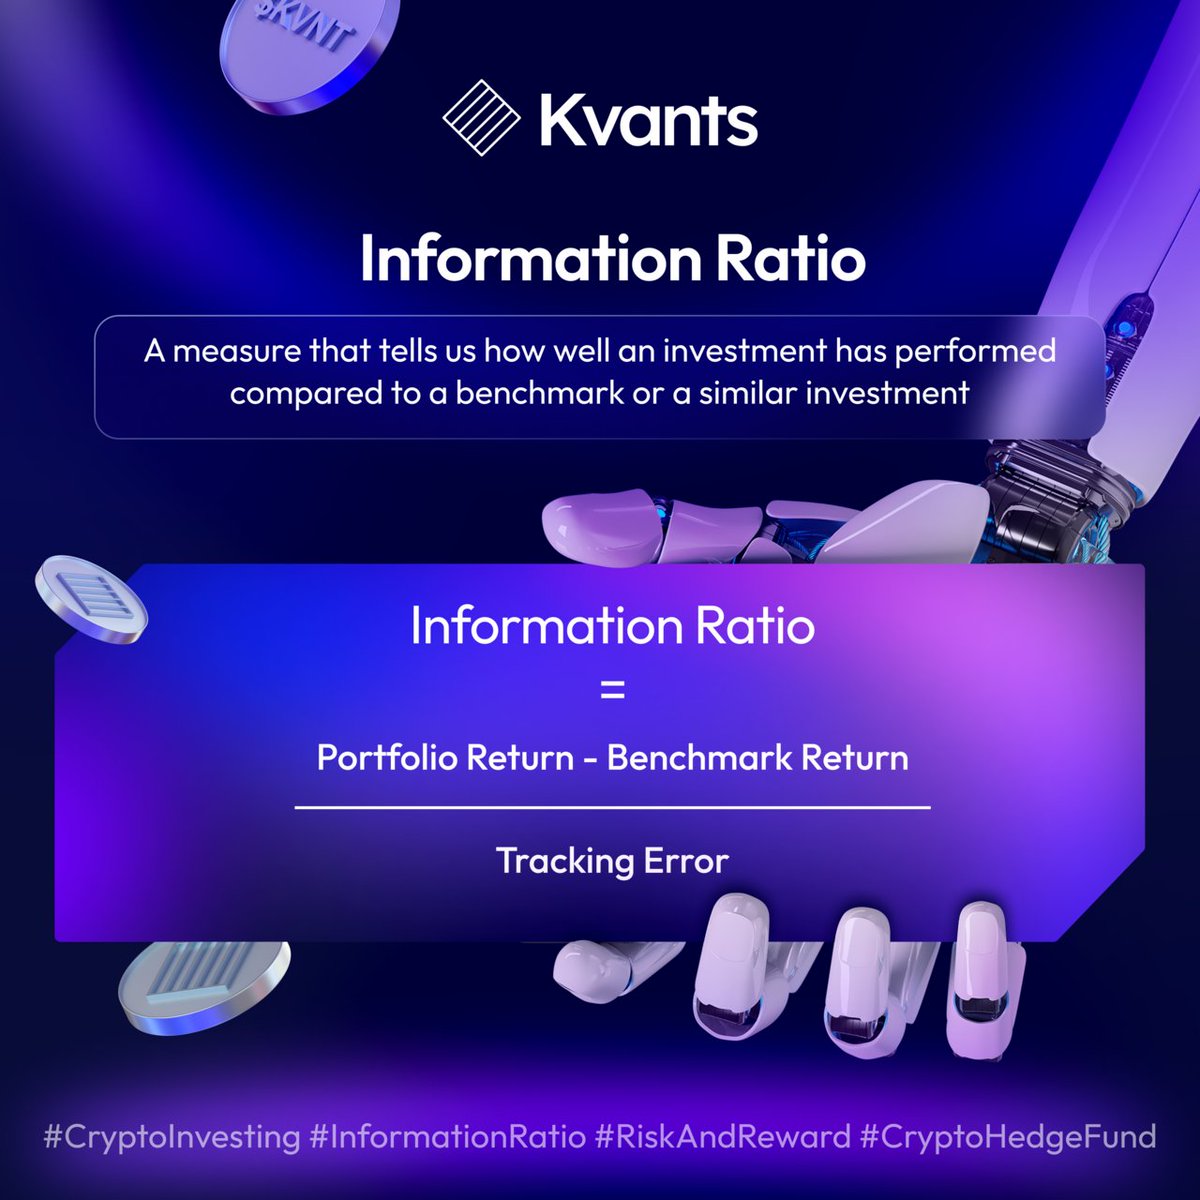 Discover Crypto Investment Insights 🚀

Explore the power of the Information Ratio! 

Learn how we assess performance versus risk in crypto investments

Maximize your returns effectively

#CryptoInvesting #InformationRatio #RiskAndReward #CryptoHedgeFund